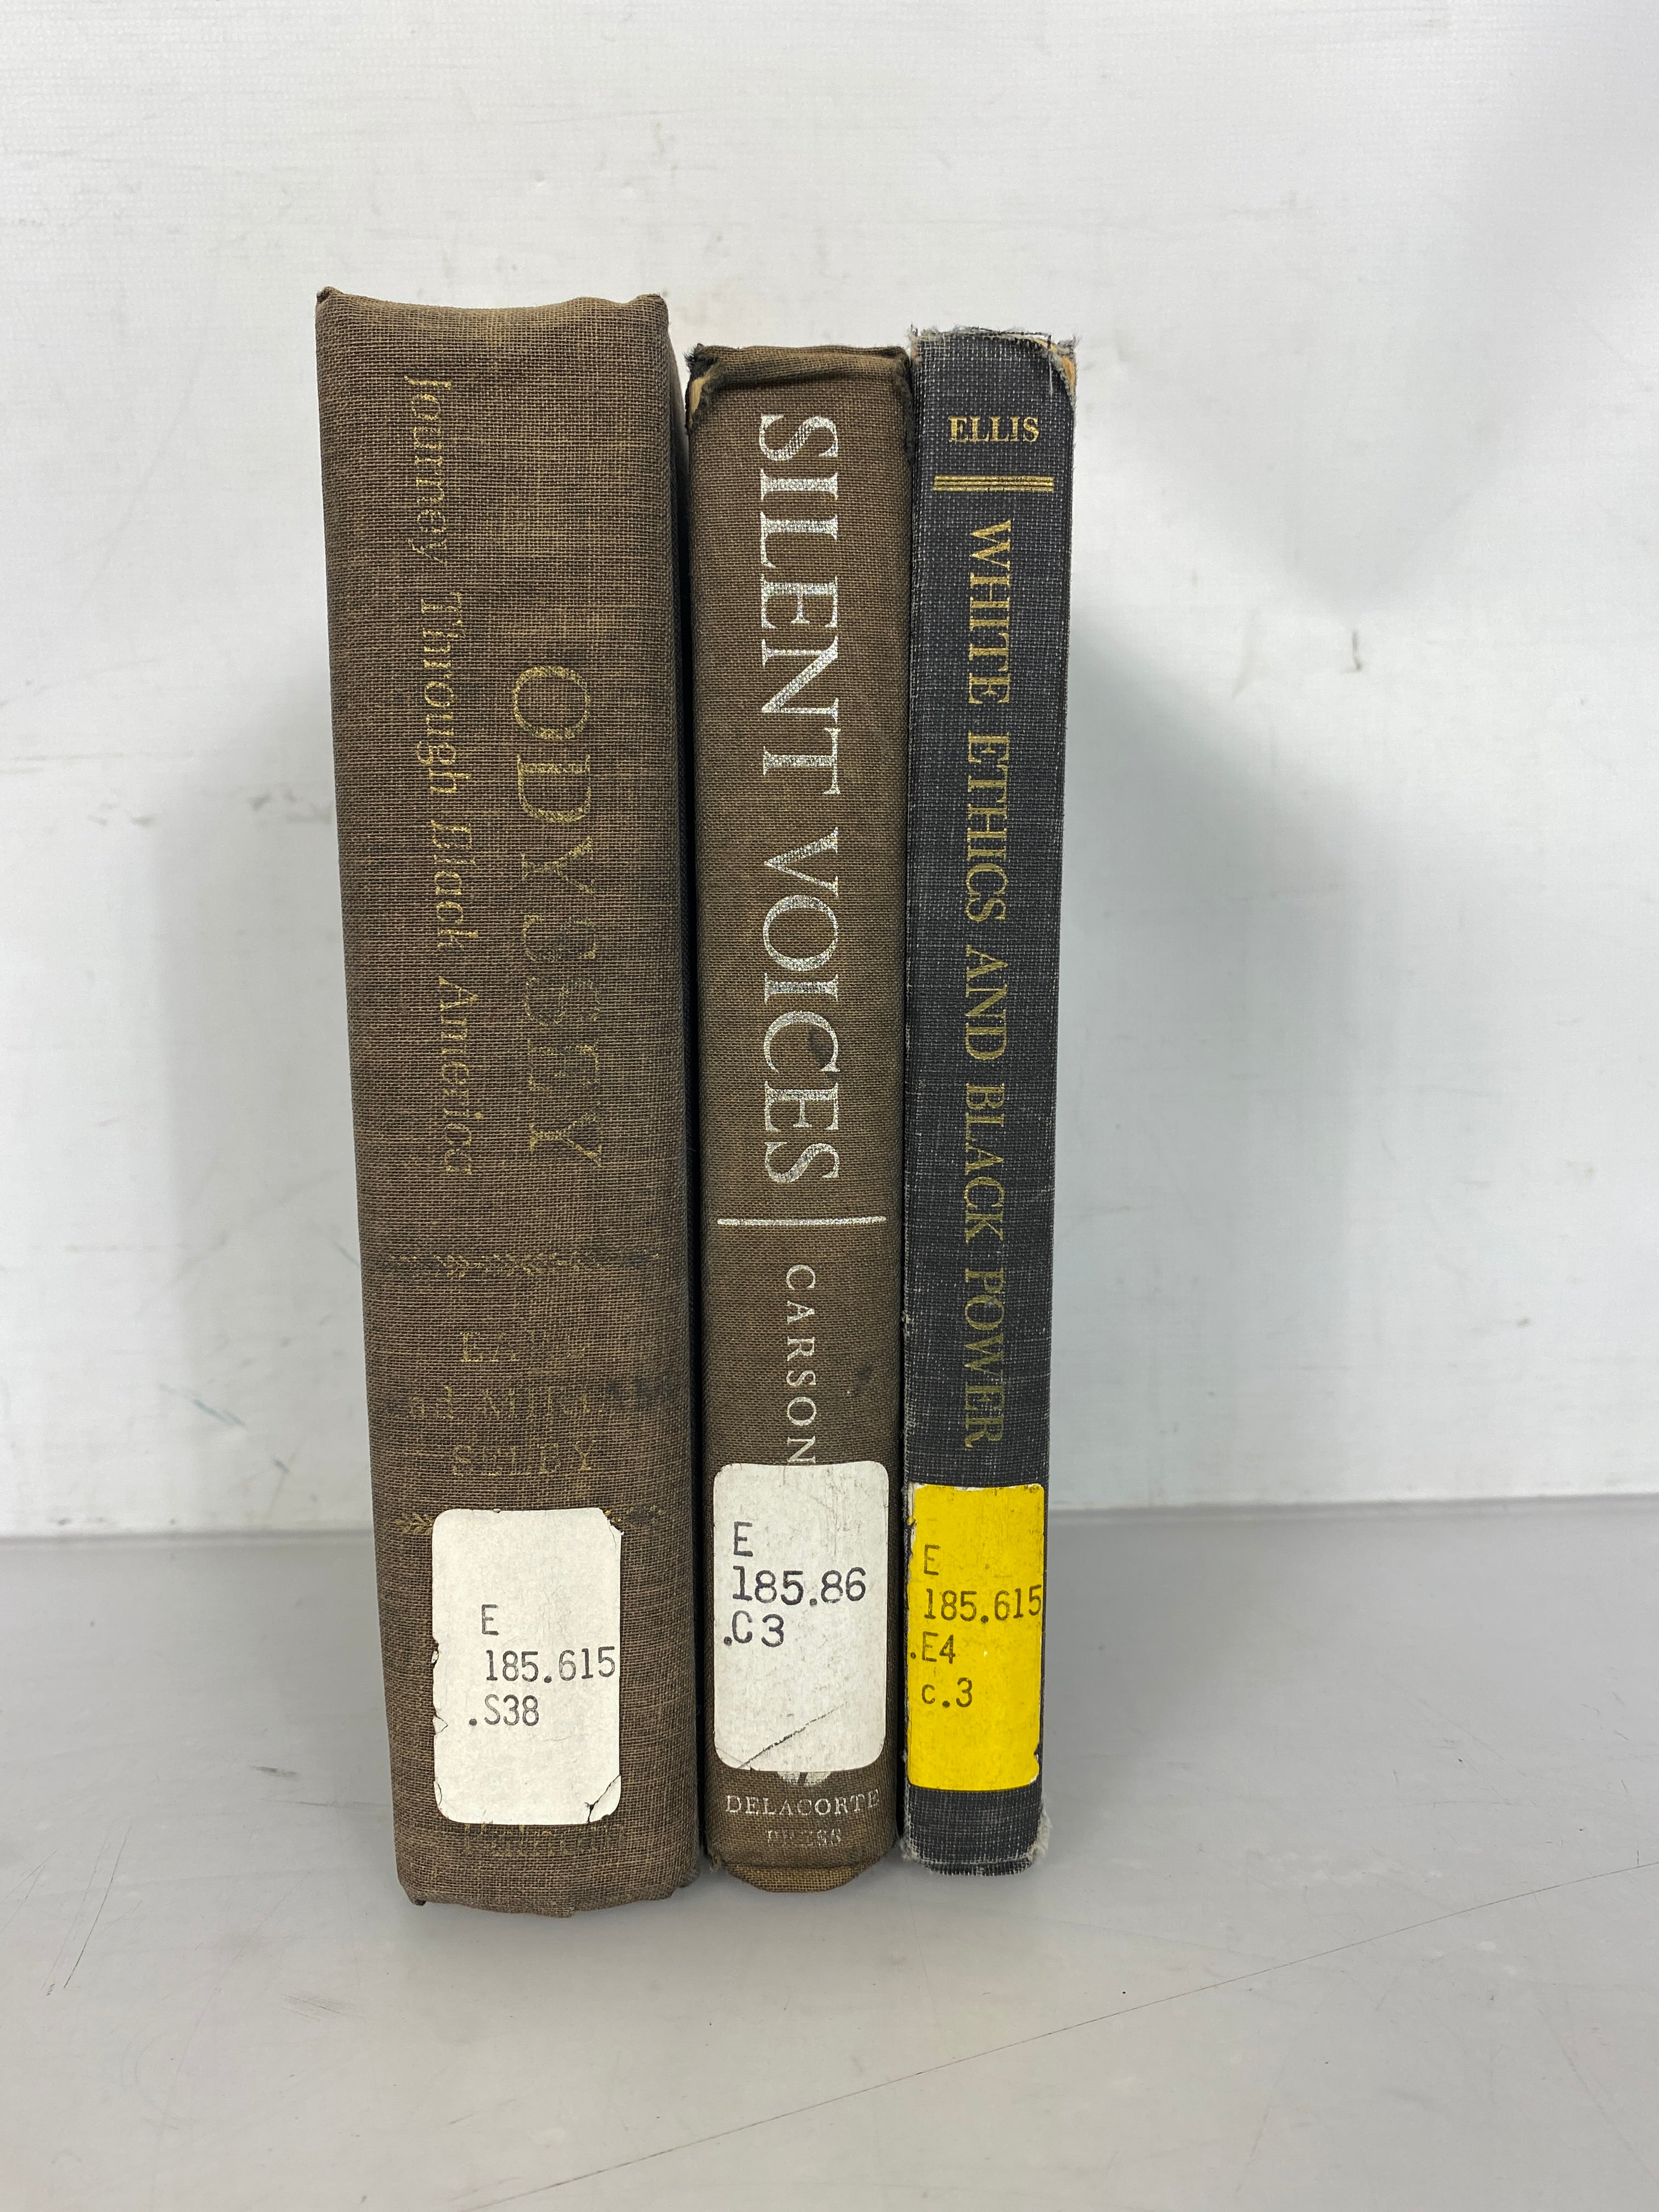 Lot of 3 African American History Books: Odyssey (1971), White Ethics and Black Power (1969) and Silent Voices (1969) HC